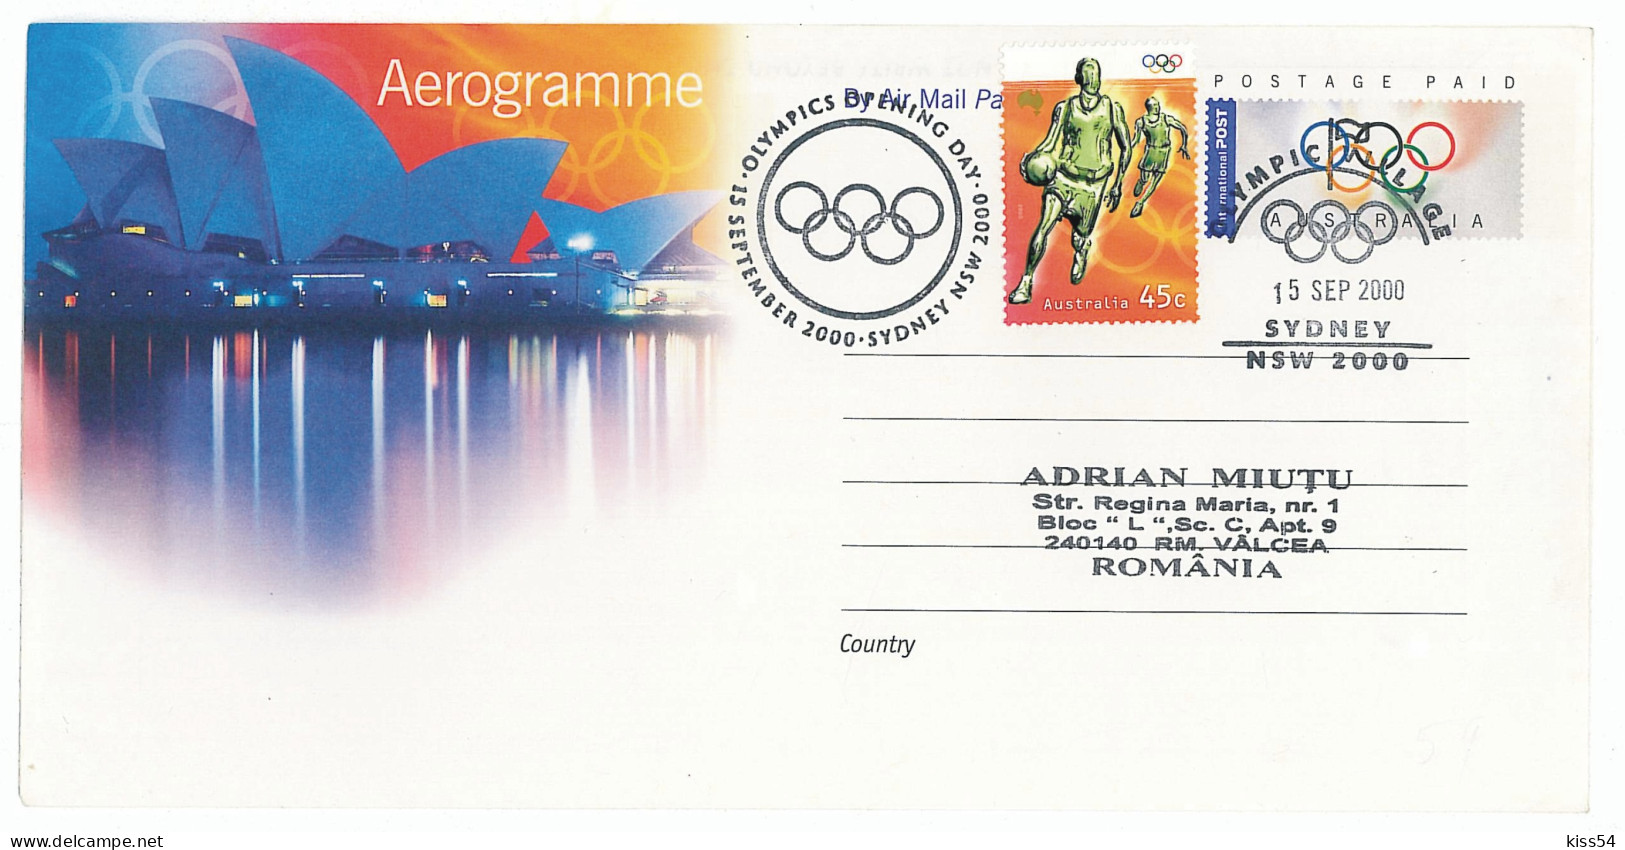 CV 29 - 1086 SYDNEY Olimpic Games, Bascketball - Aerogramme Cover - Used - 2000 - Covers & Documents